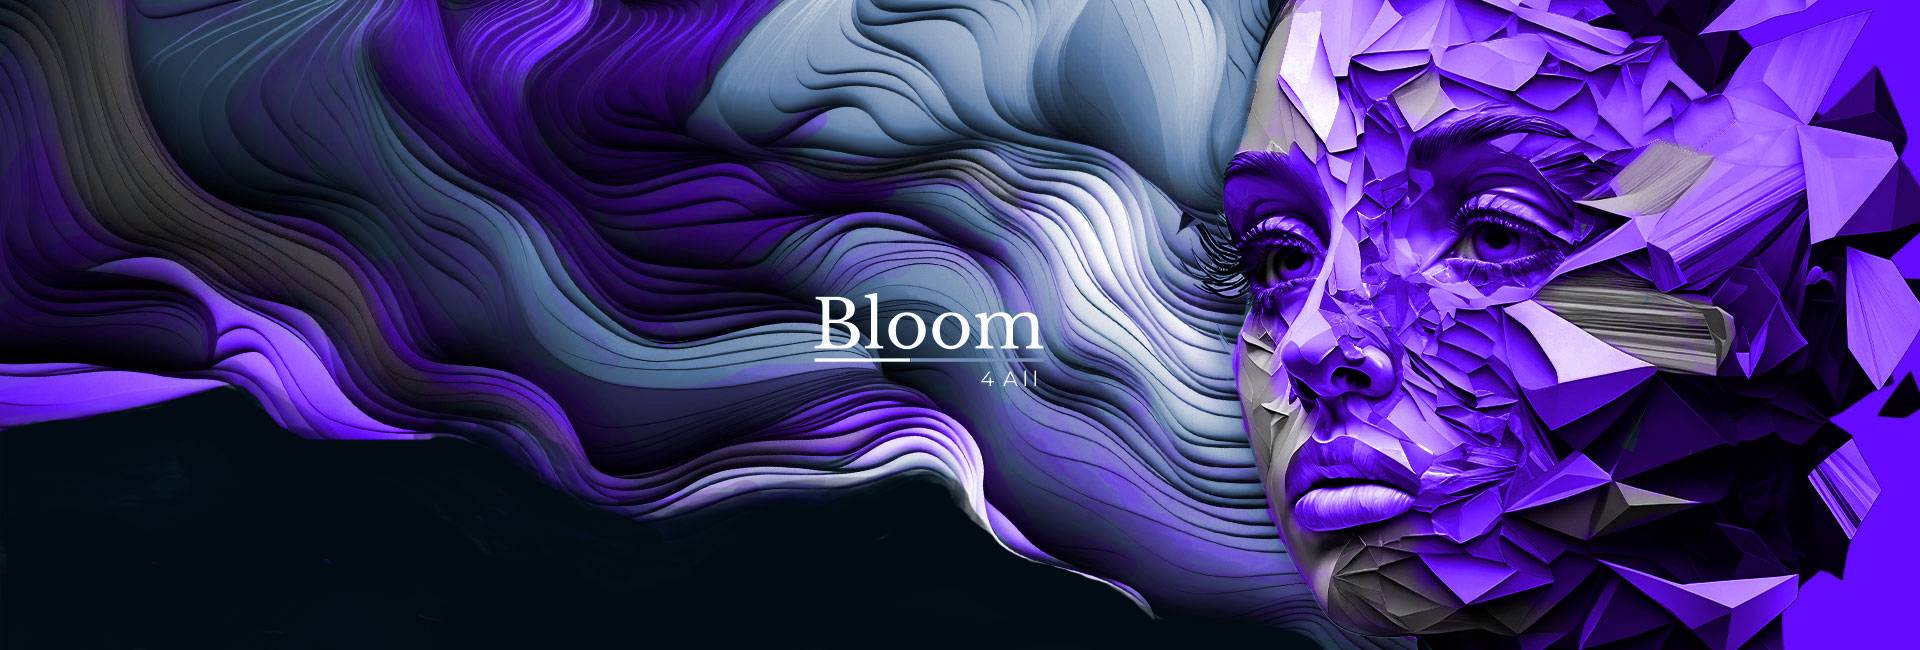 Bloom 4 All